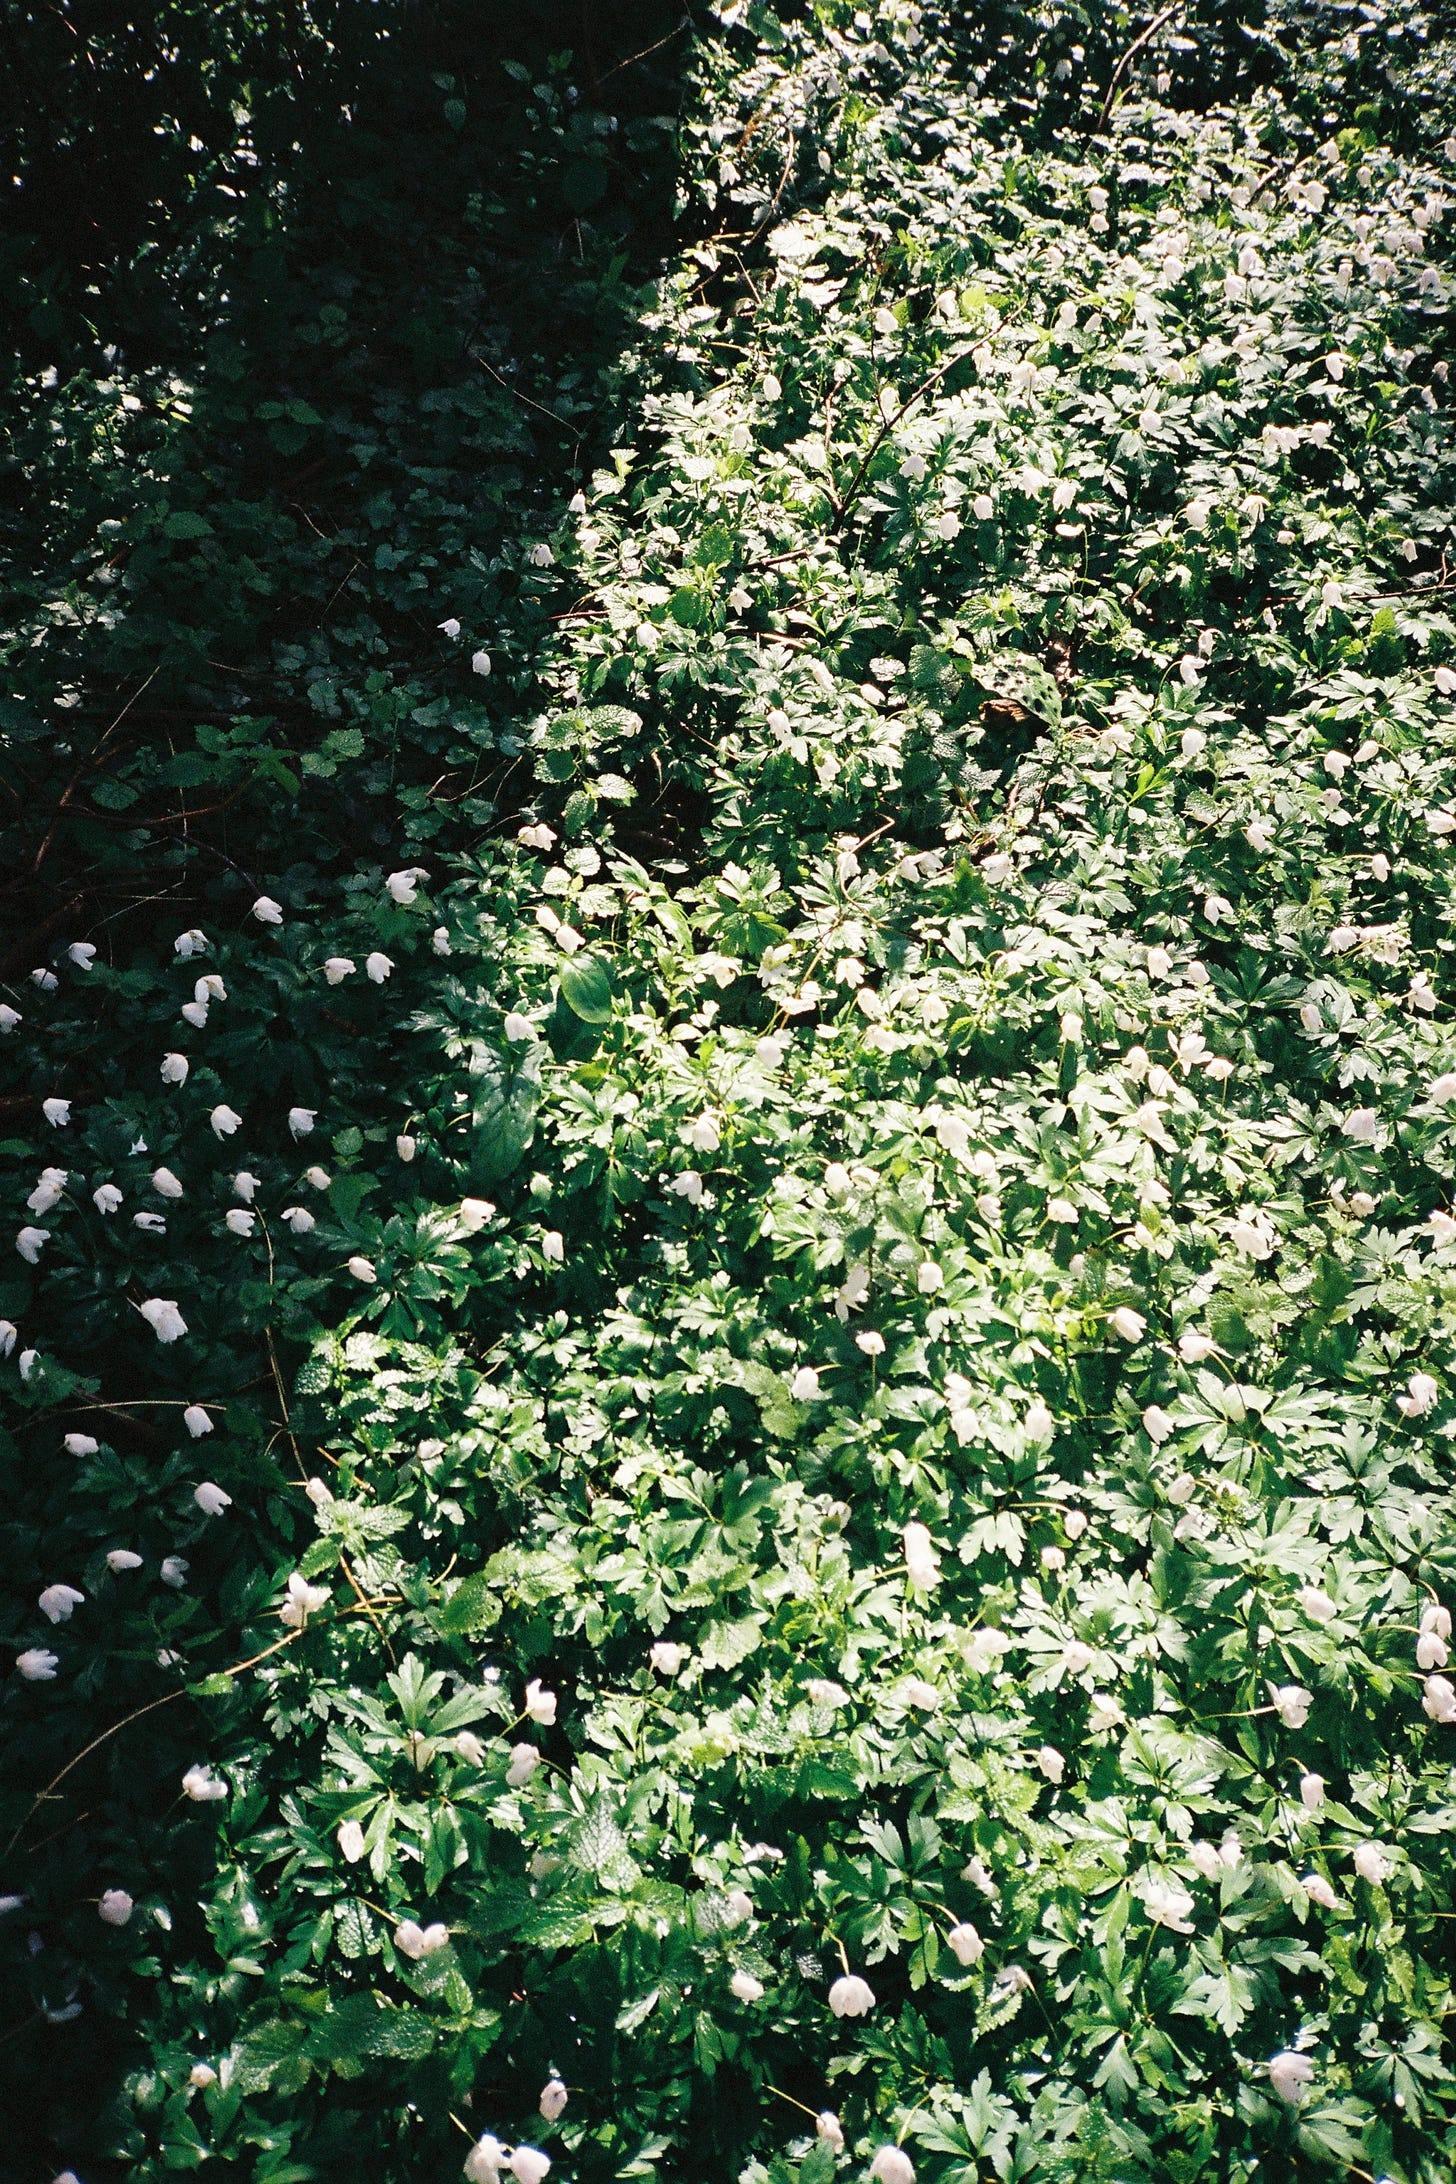 analog photograph of a sun-lit forest floor covered with green plants and tiny white flowers.